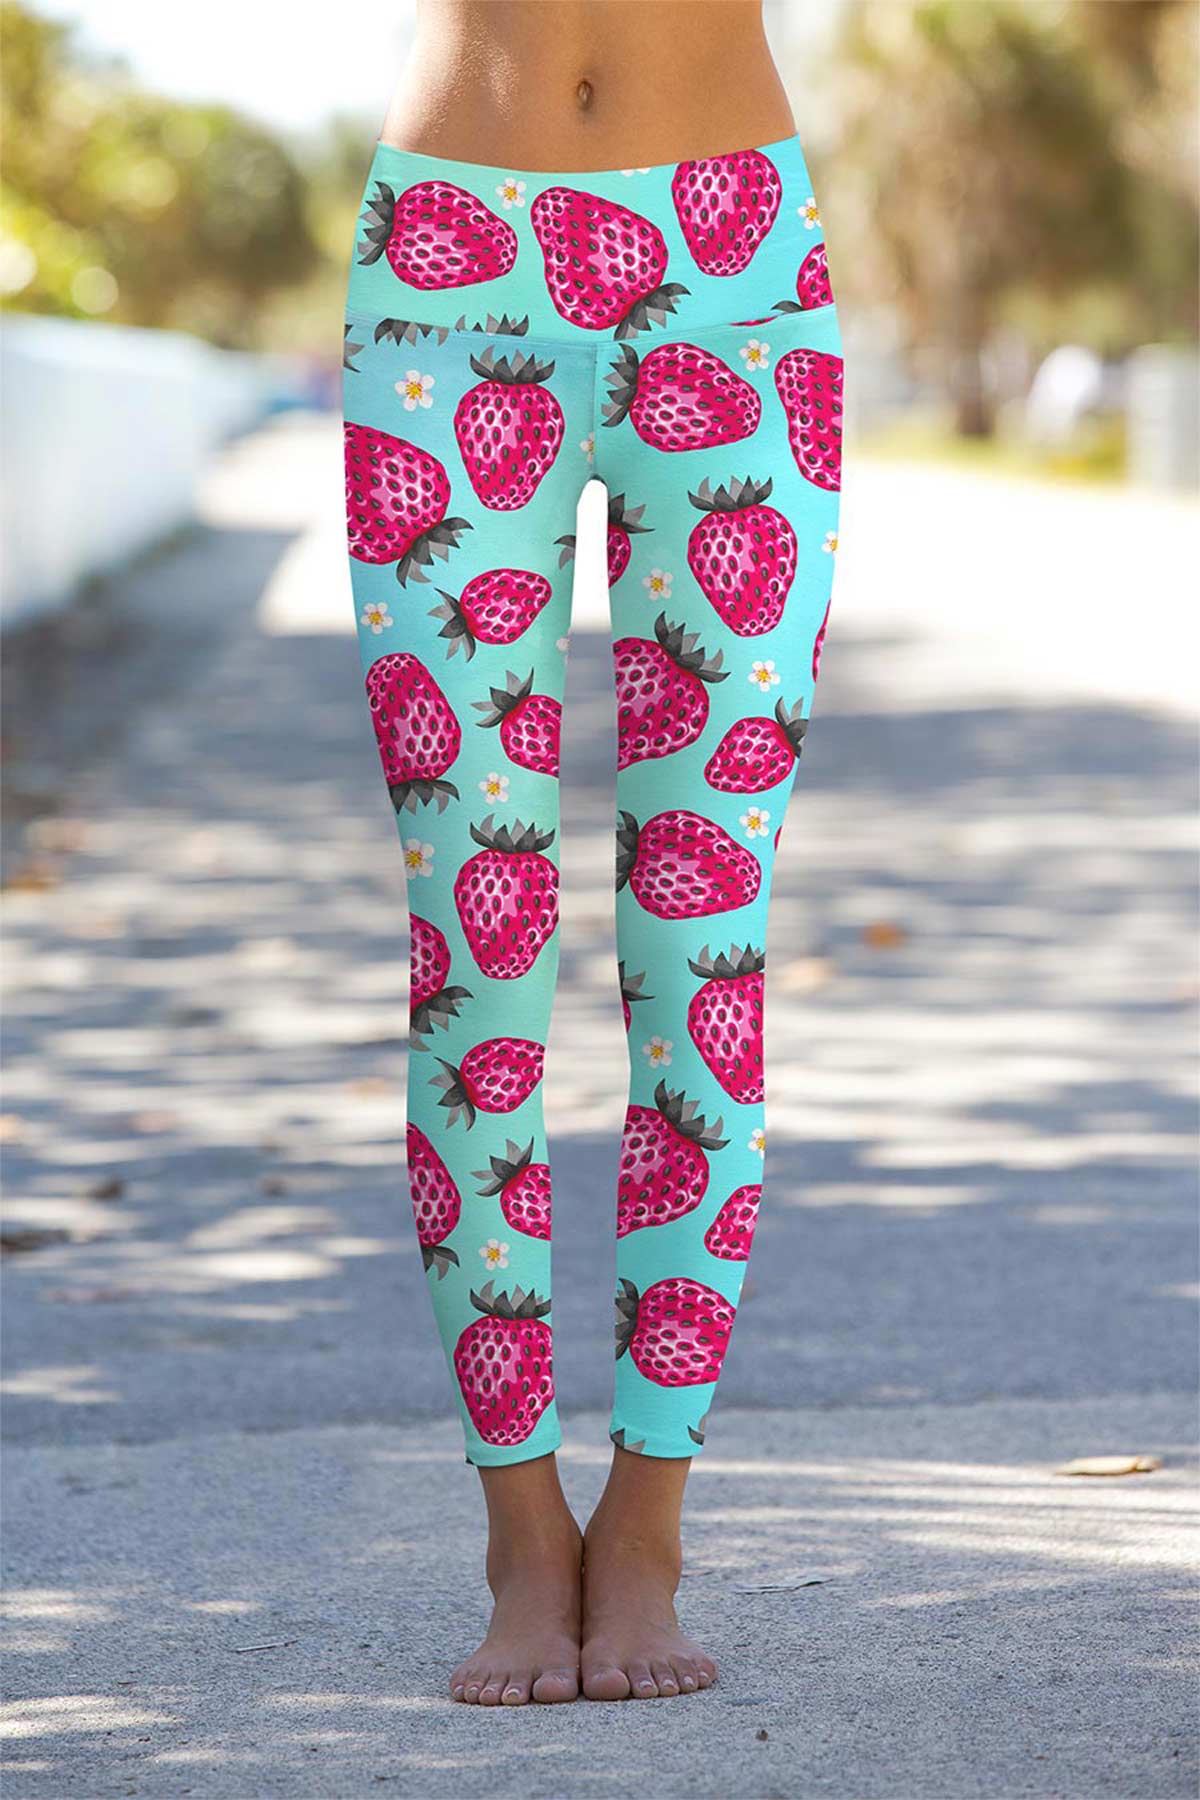 Berry Cute Lucy Blue Strawberry Print Leggings Pants - Women | Pineapple Clothing